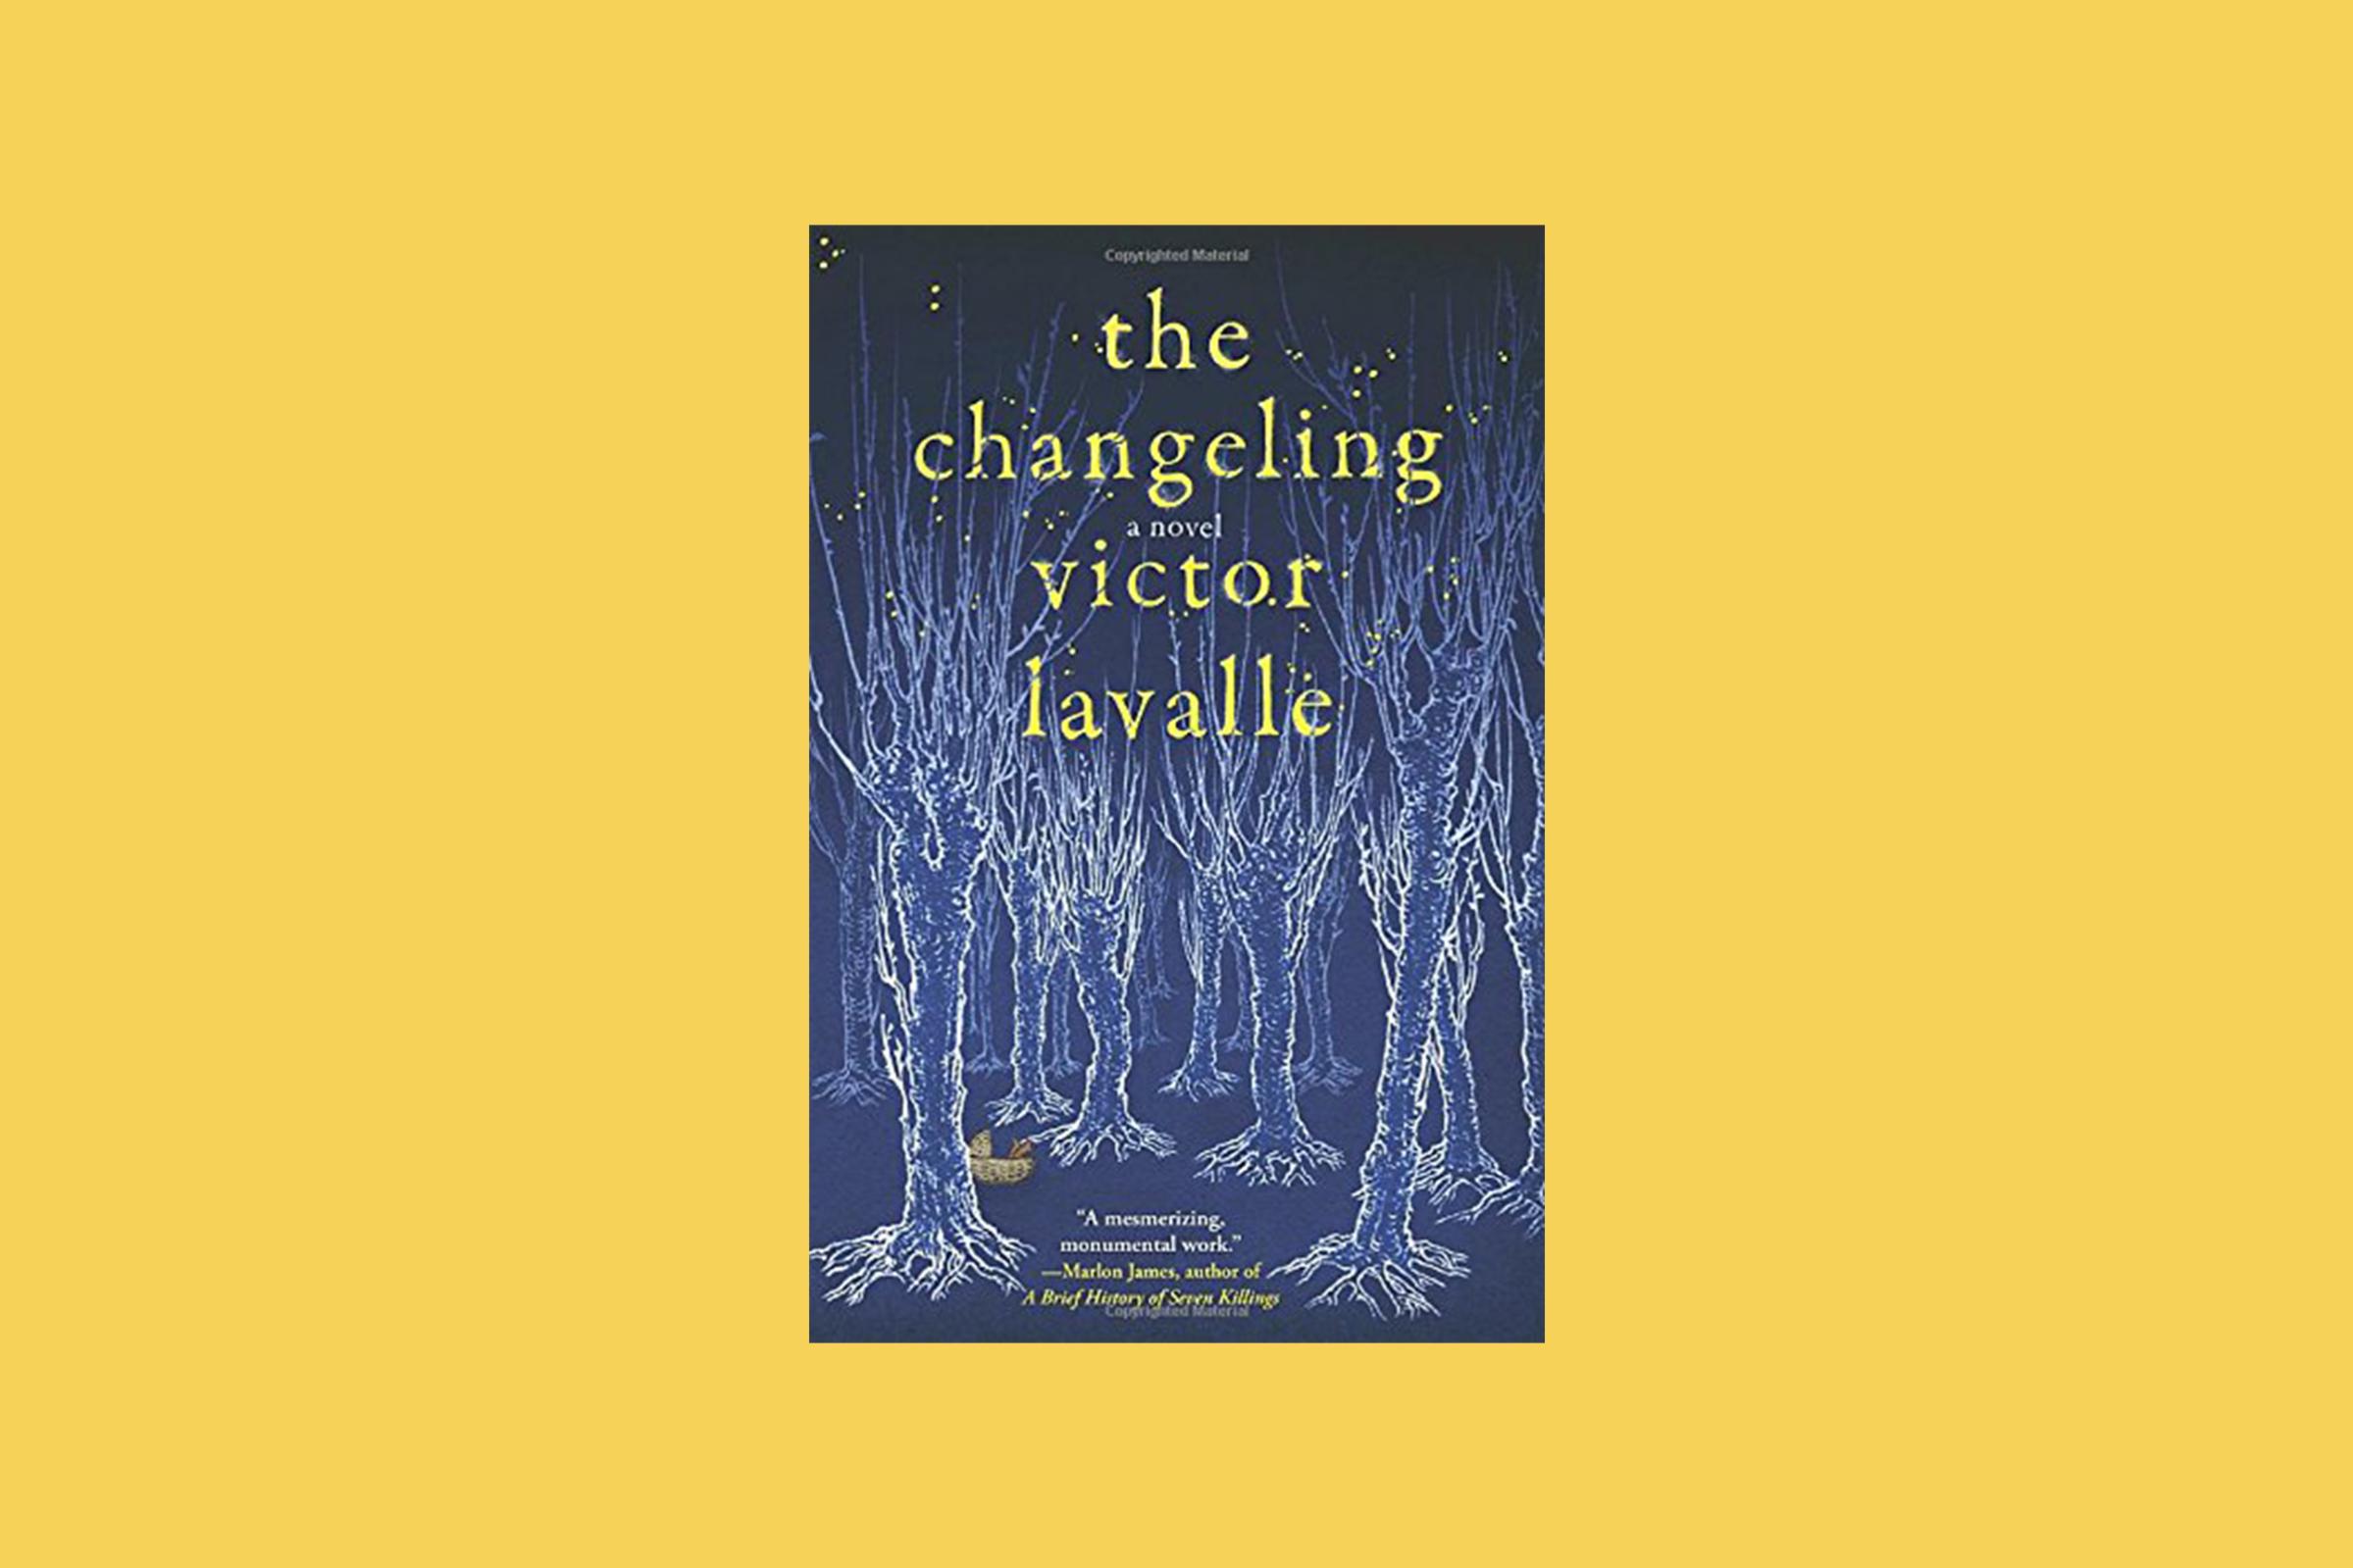 The Changeling is one of the top 10 novels of 2017